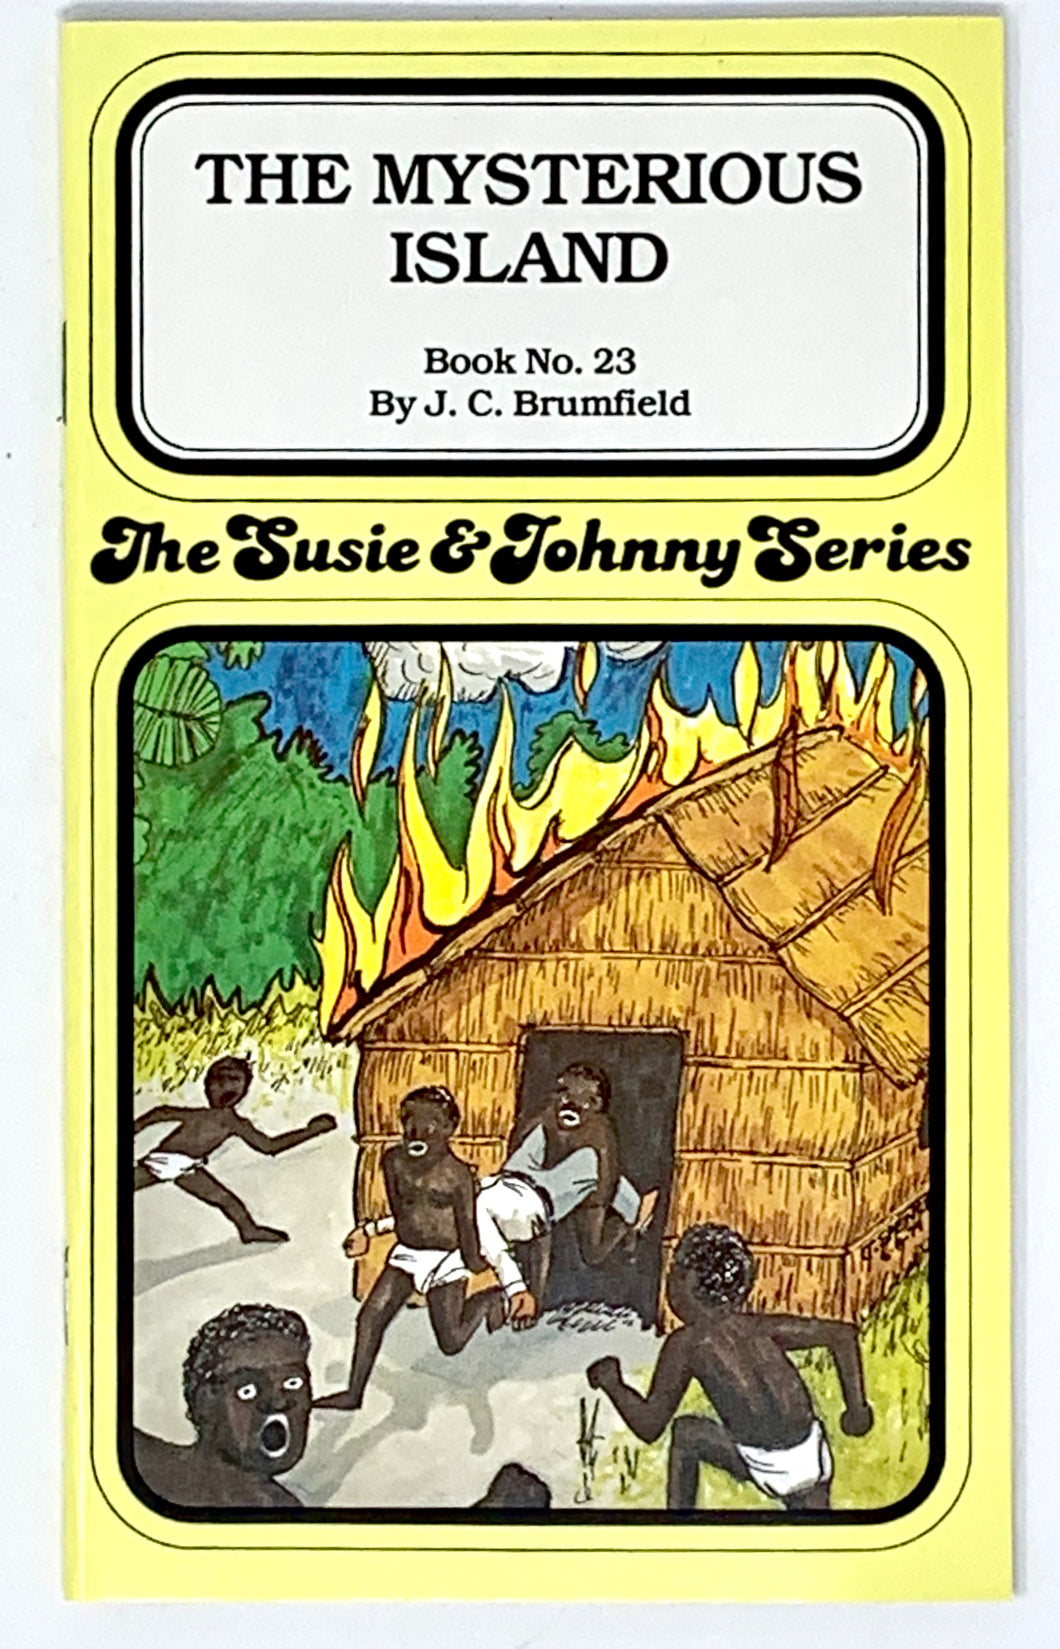 THE SUSIE & JOHNNY SERIES BOOK #23 